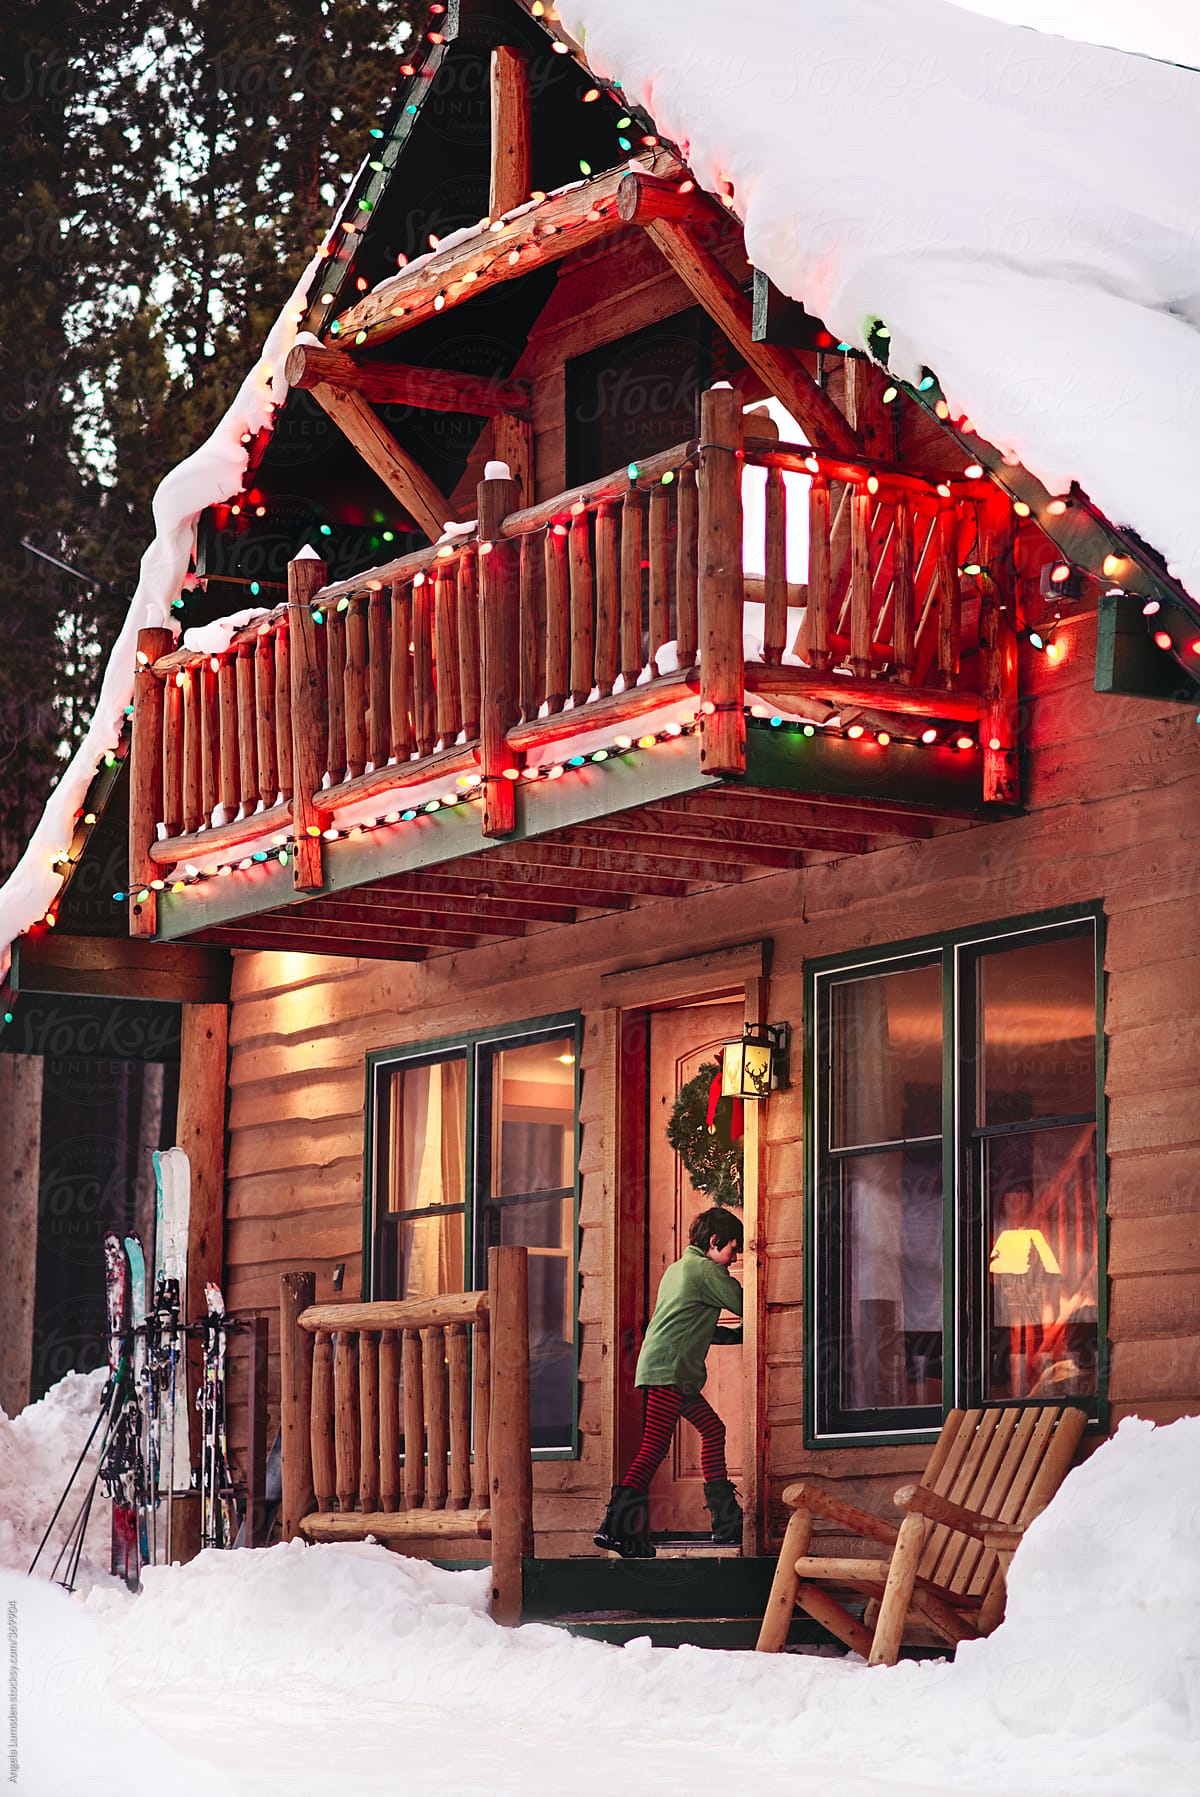 Boy goes in the front door of a cabin decorated with holiday lights at dusk in snow